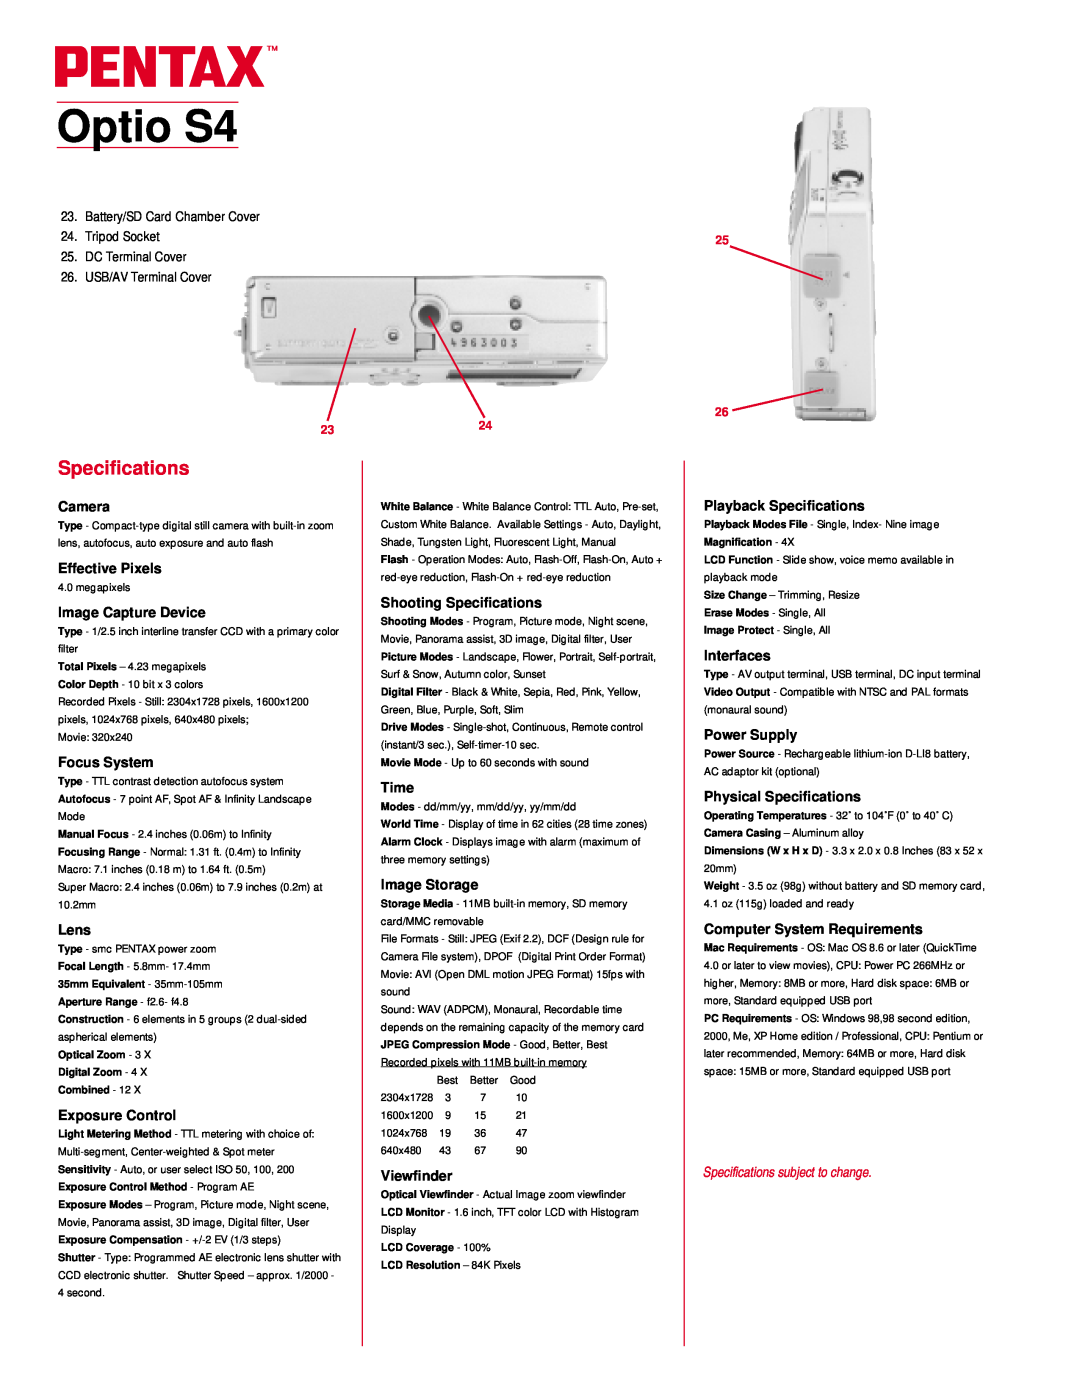 Pentax manual Optio S4, Specifications subject to change 